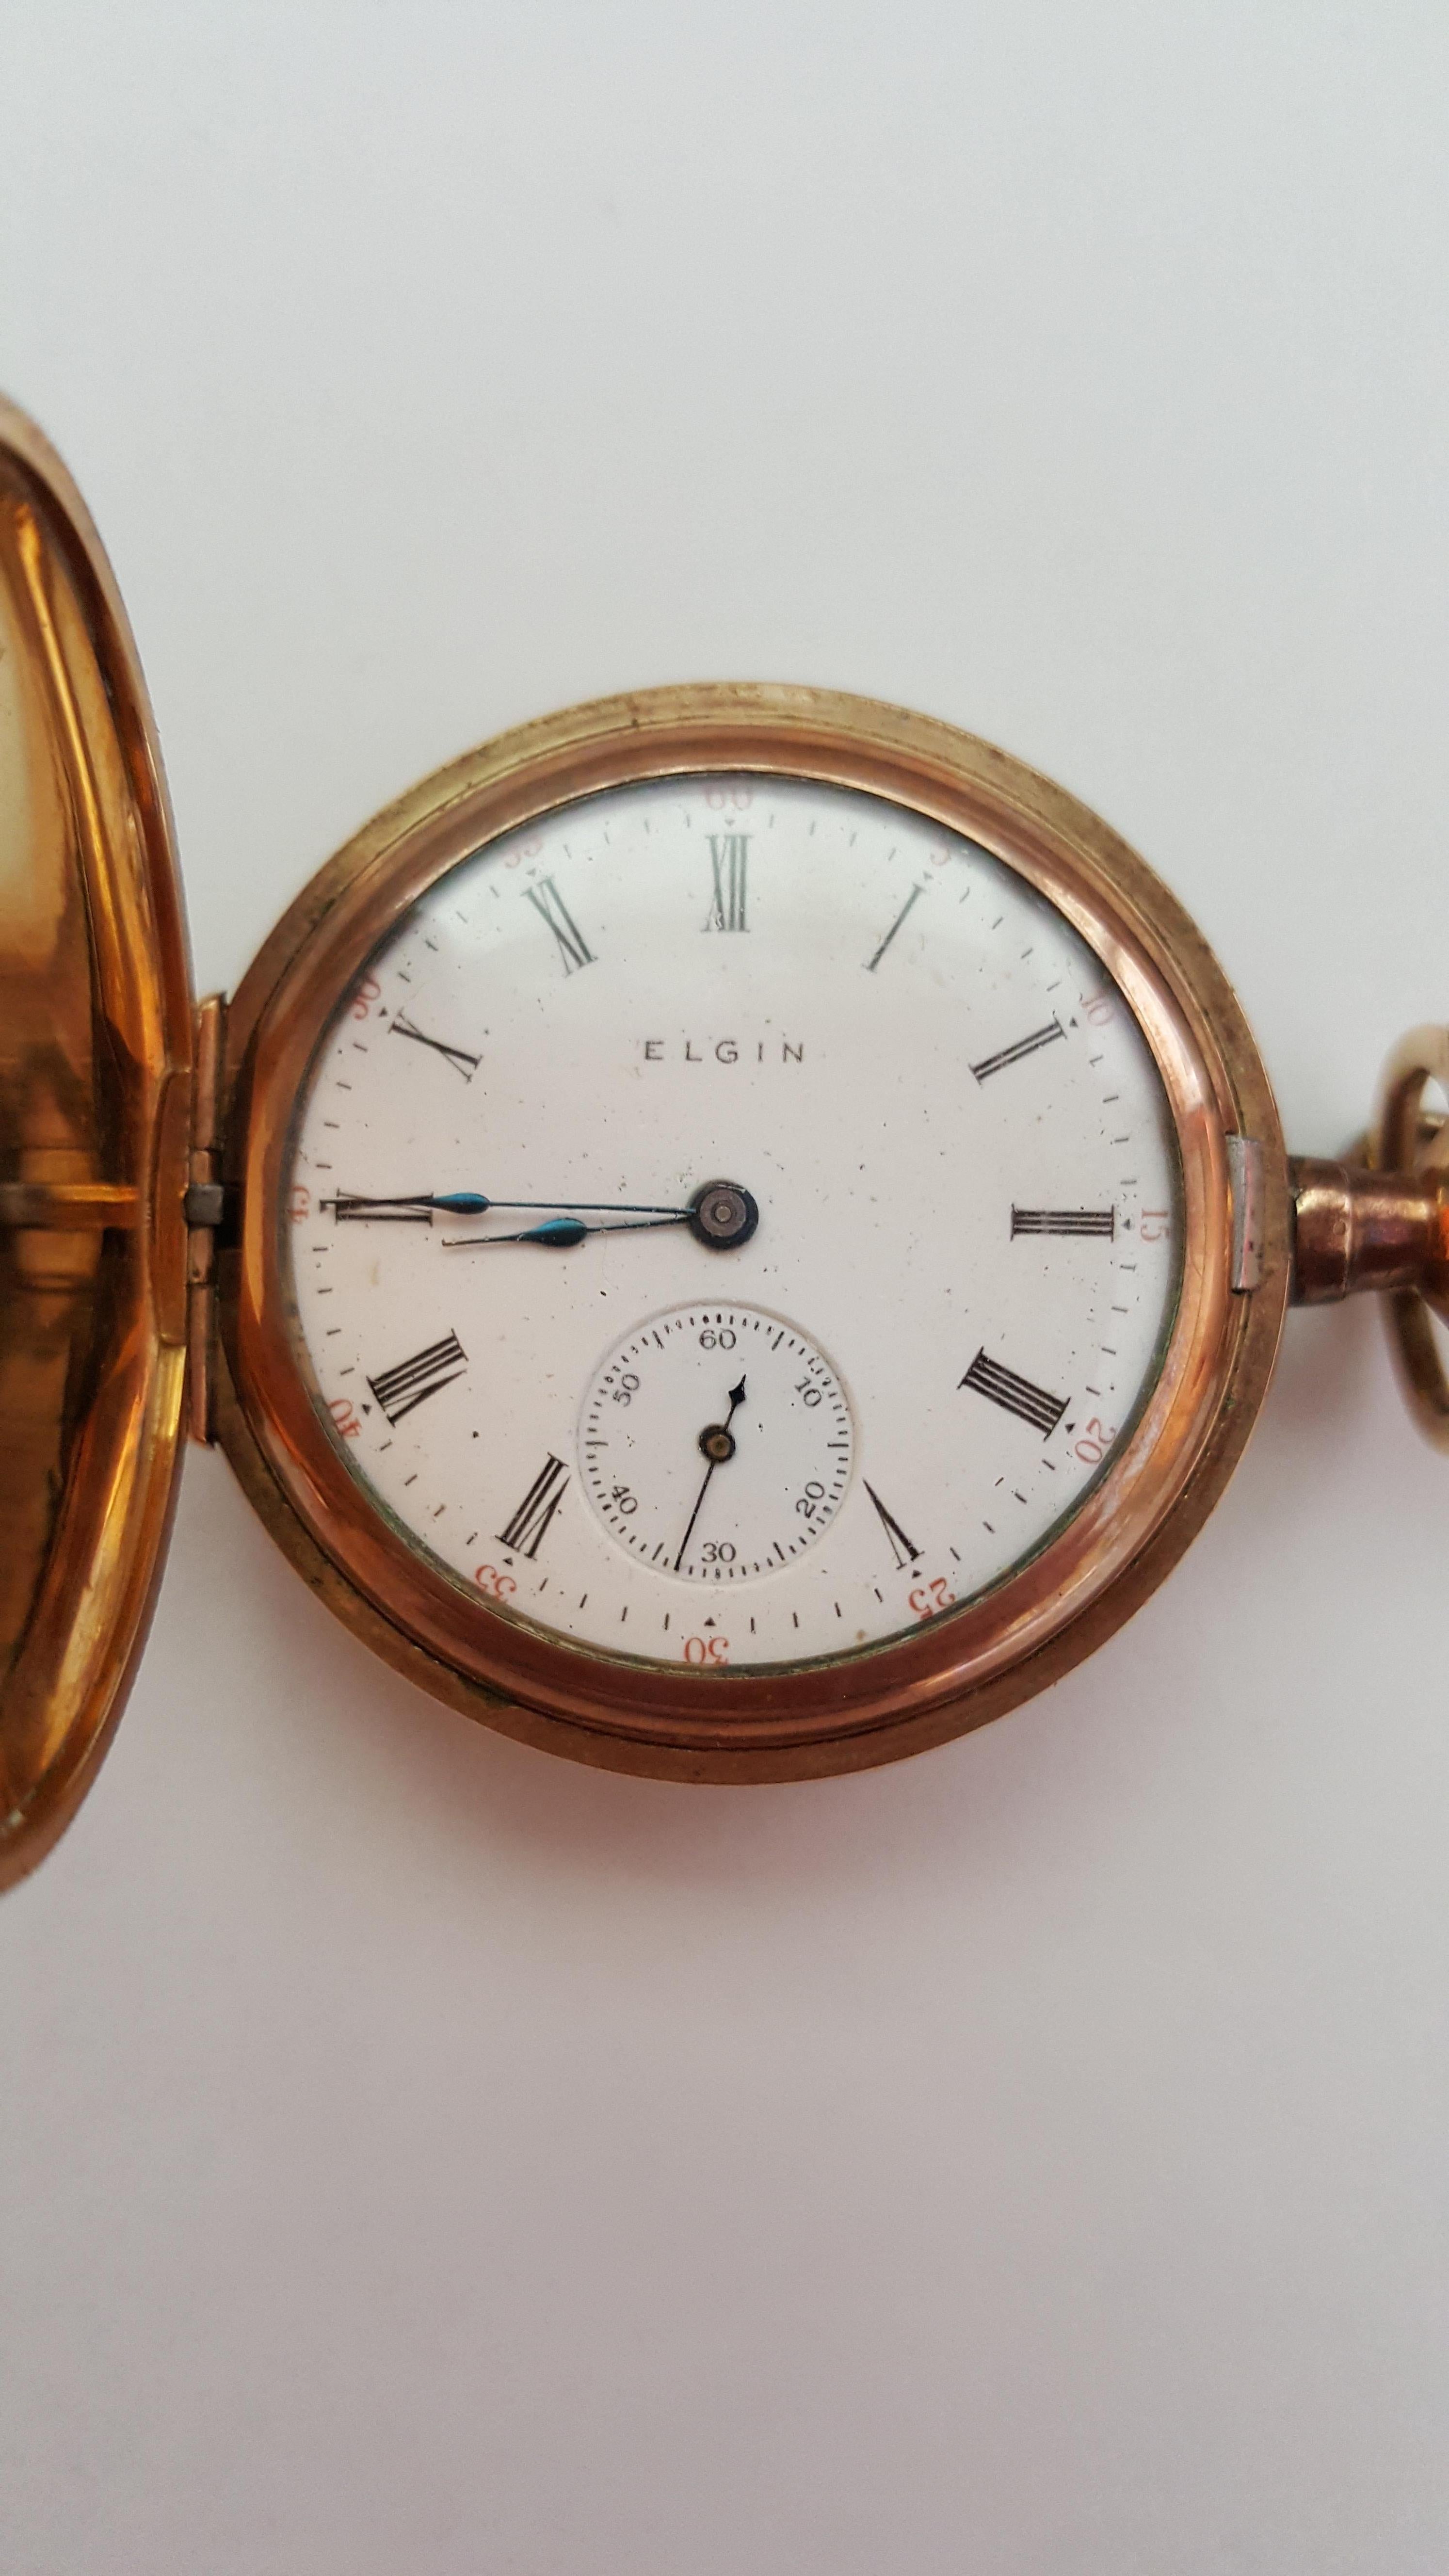 Vintage 1909 Gold Plated Elgin Pocket Watch, Working (see video), Very Good Condition, Grade 320, Model 2, 7 Jewel, Size Os, Very nice Case, White Face, Black Roman Numerals, Seconds hand, 34 mm case , stamped guarantee 25 years. Plastic crystal is